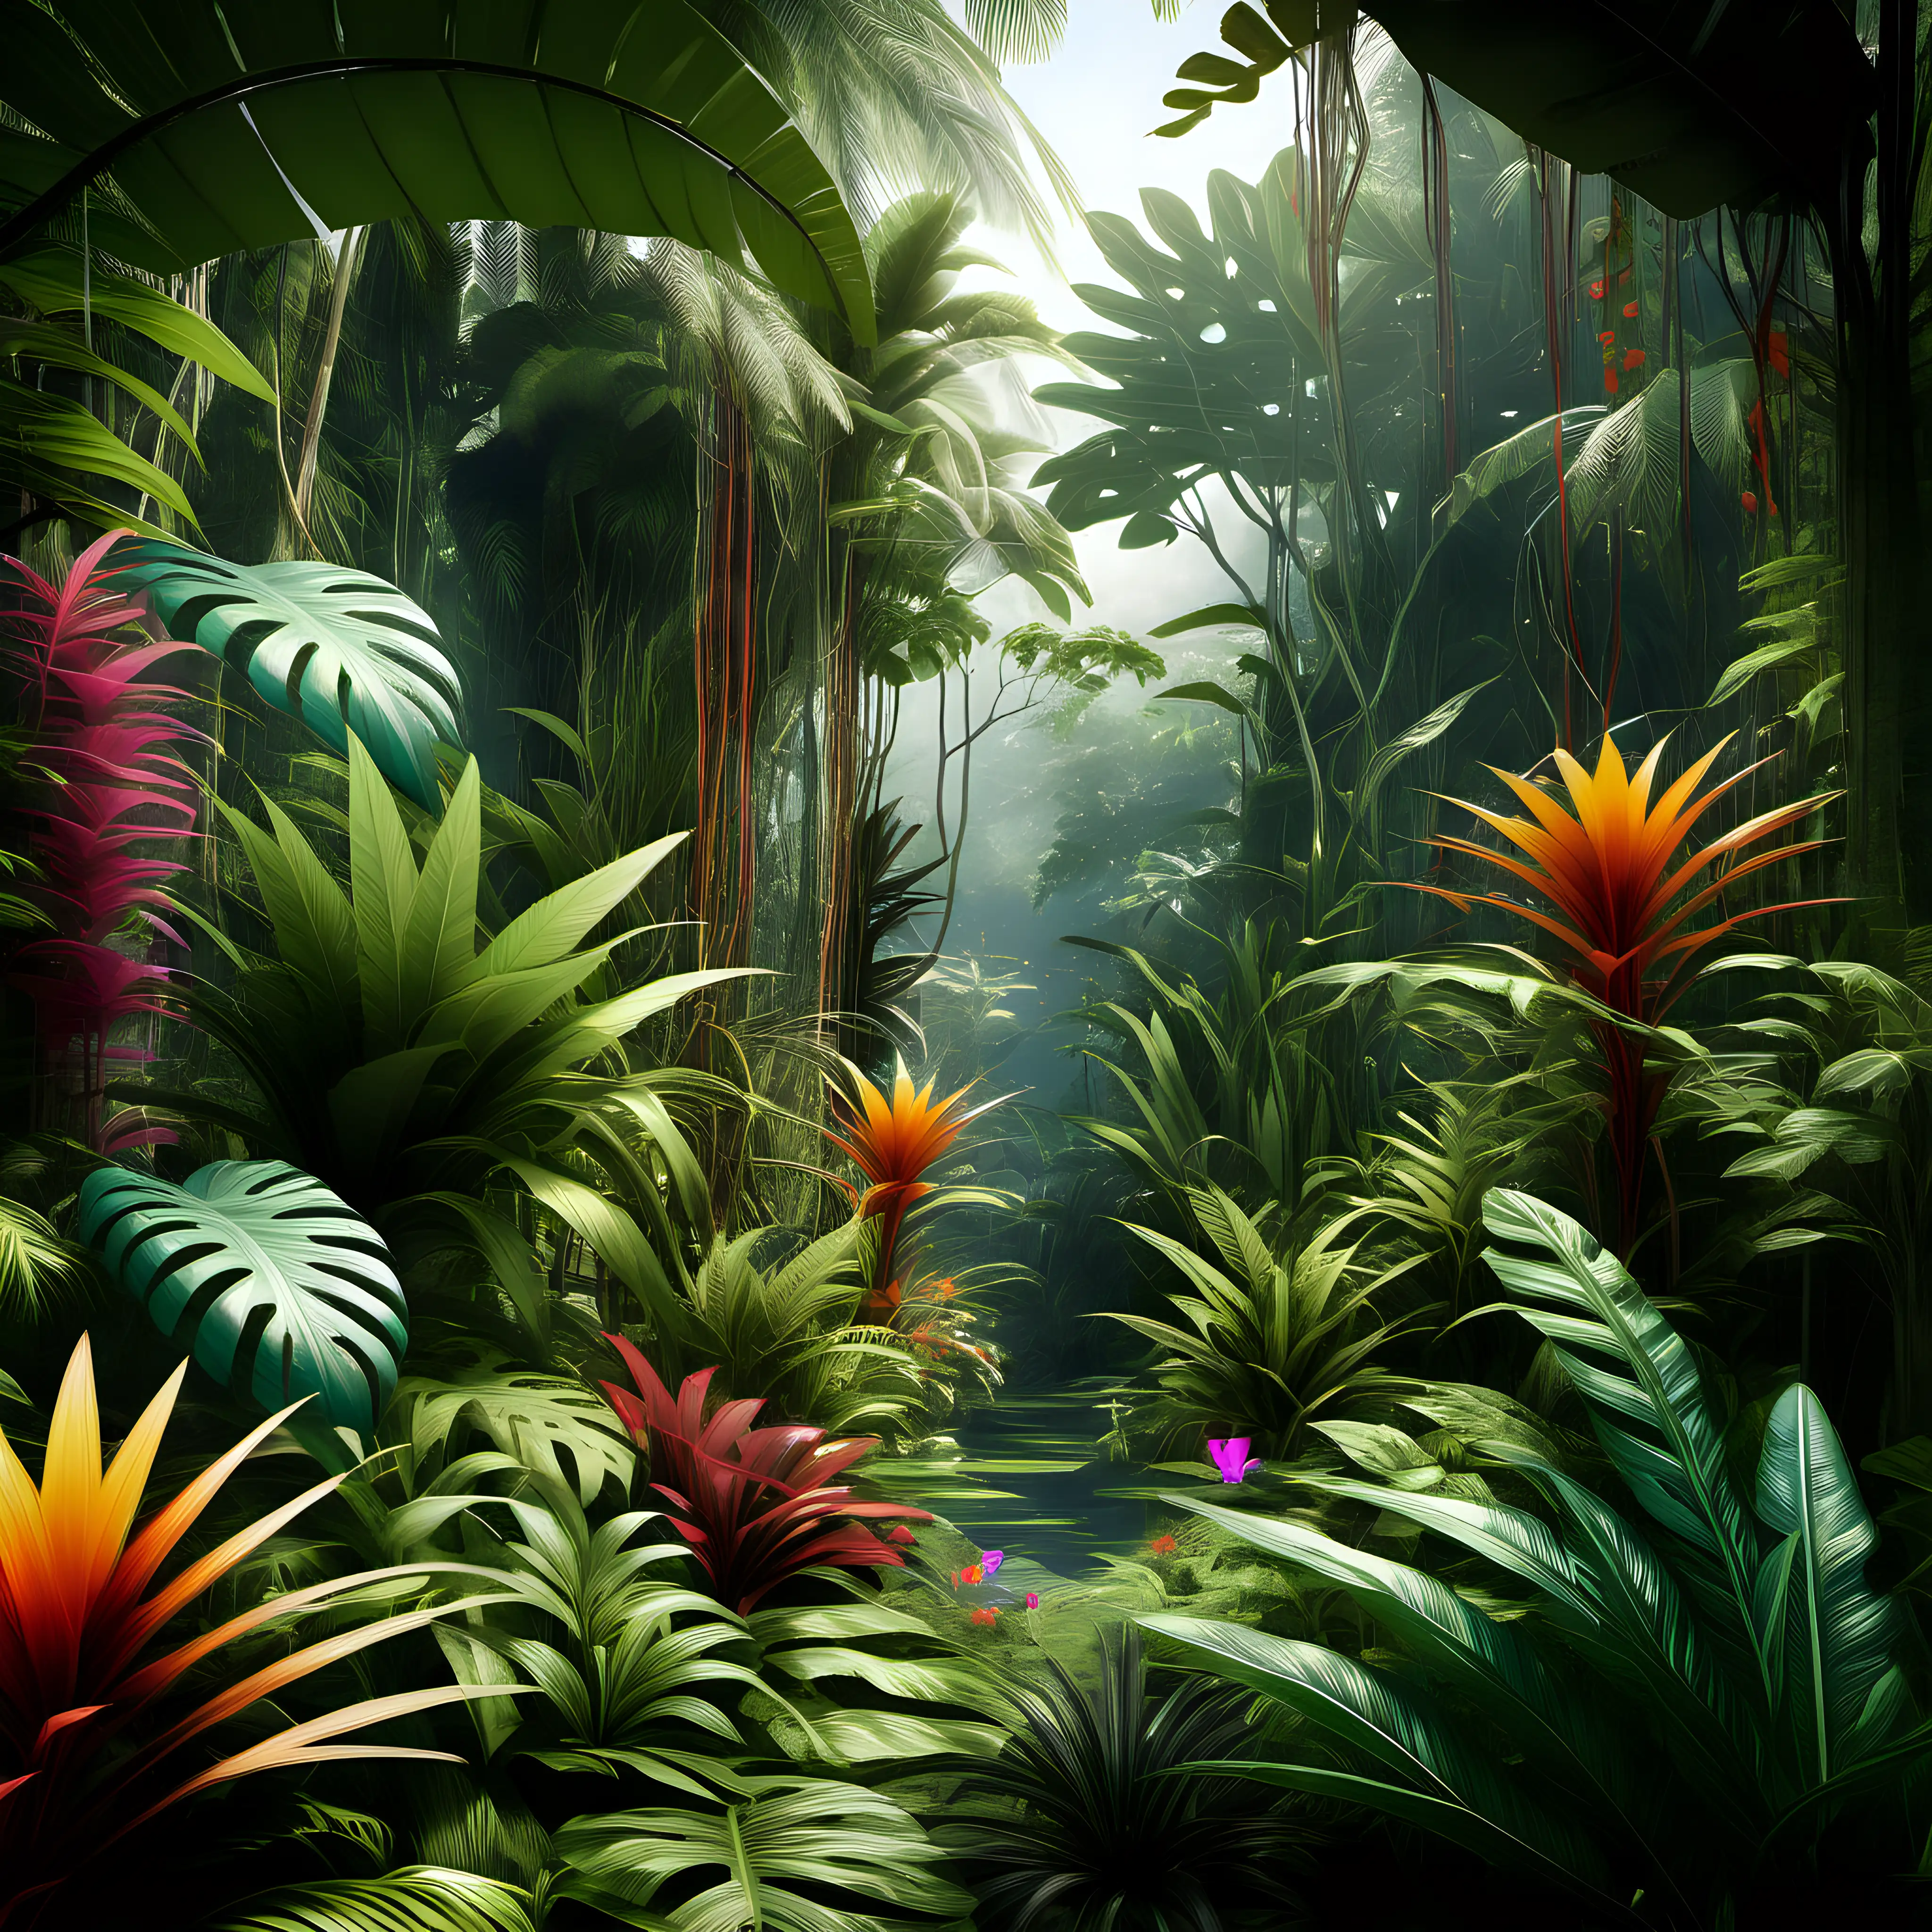 Vibrant Jungle Paradise with Colorful Plant Life